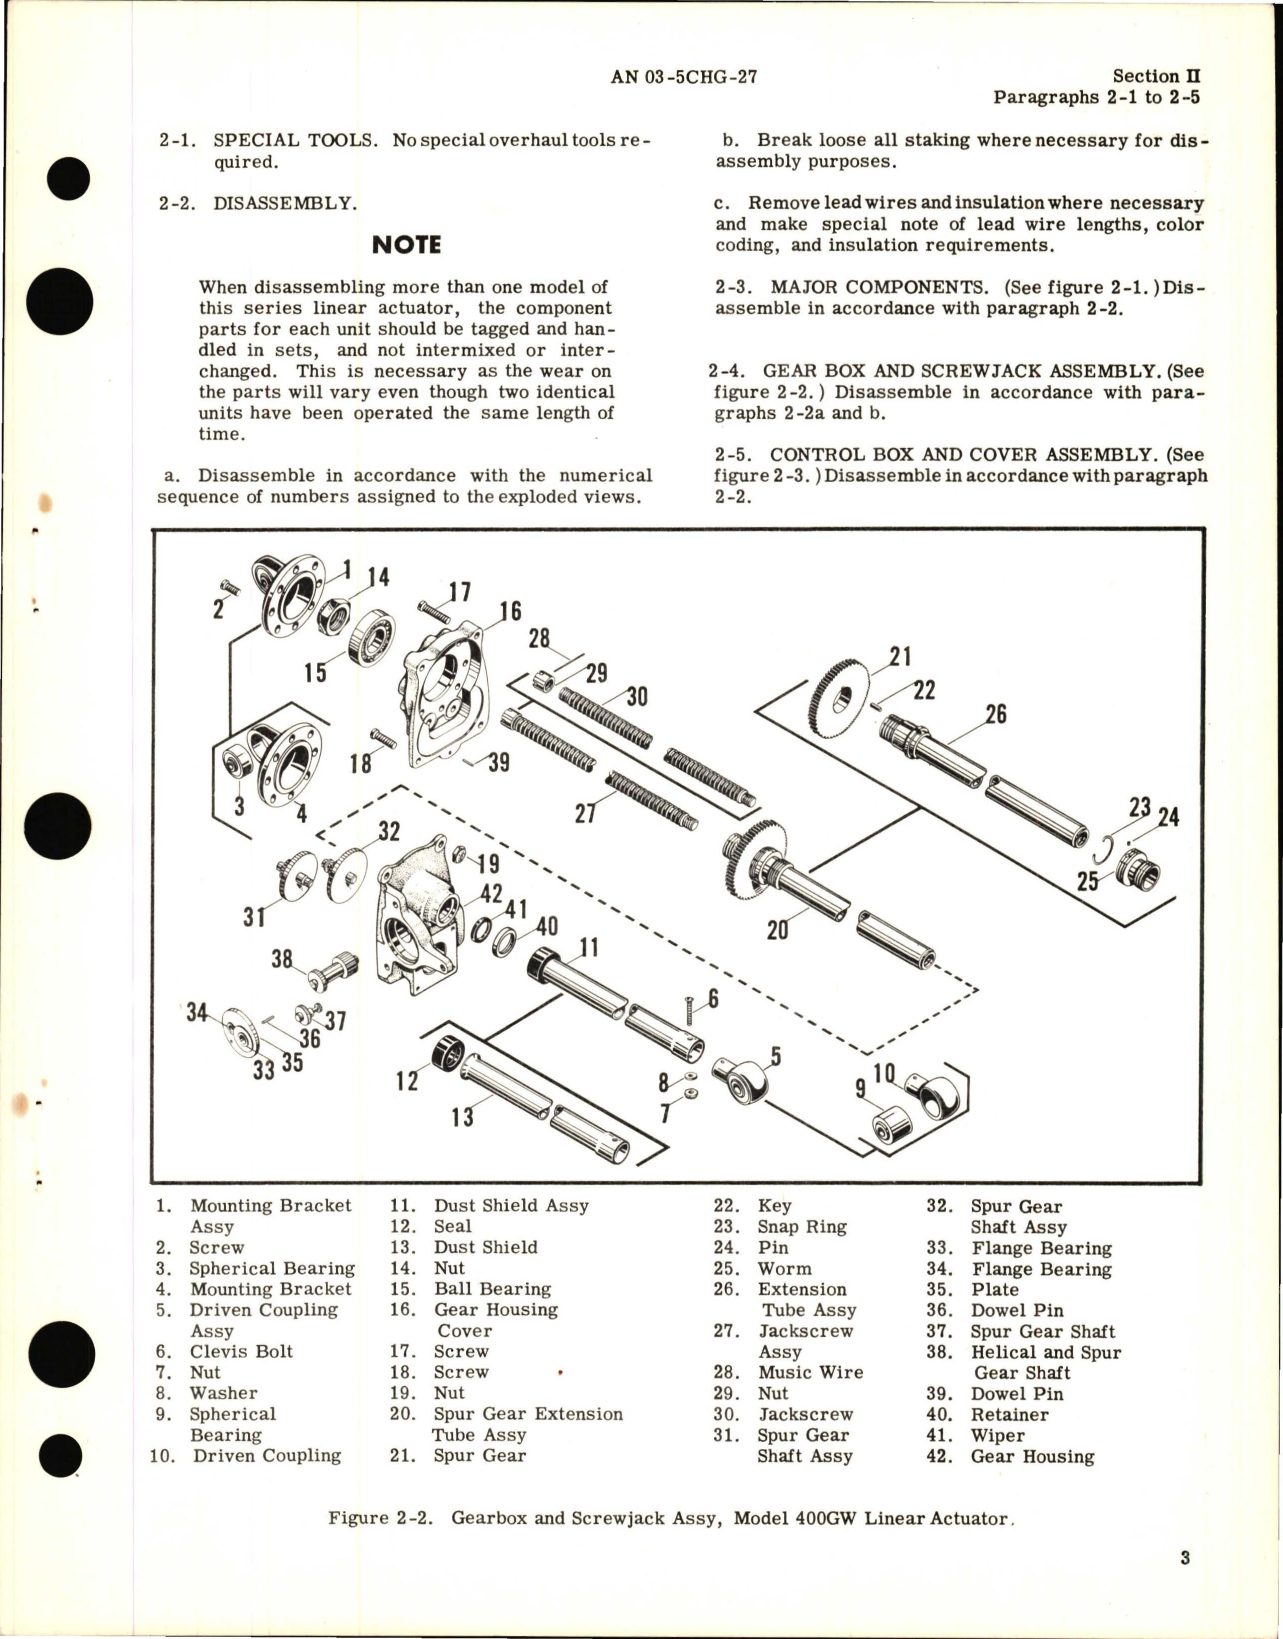 Sample page 5 from AirCorps Library document: Overhaul Instructions for Lear Linear Actuator Assembly